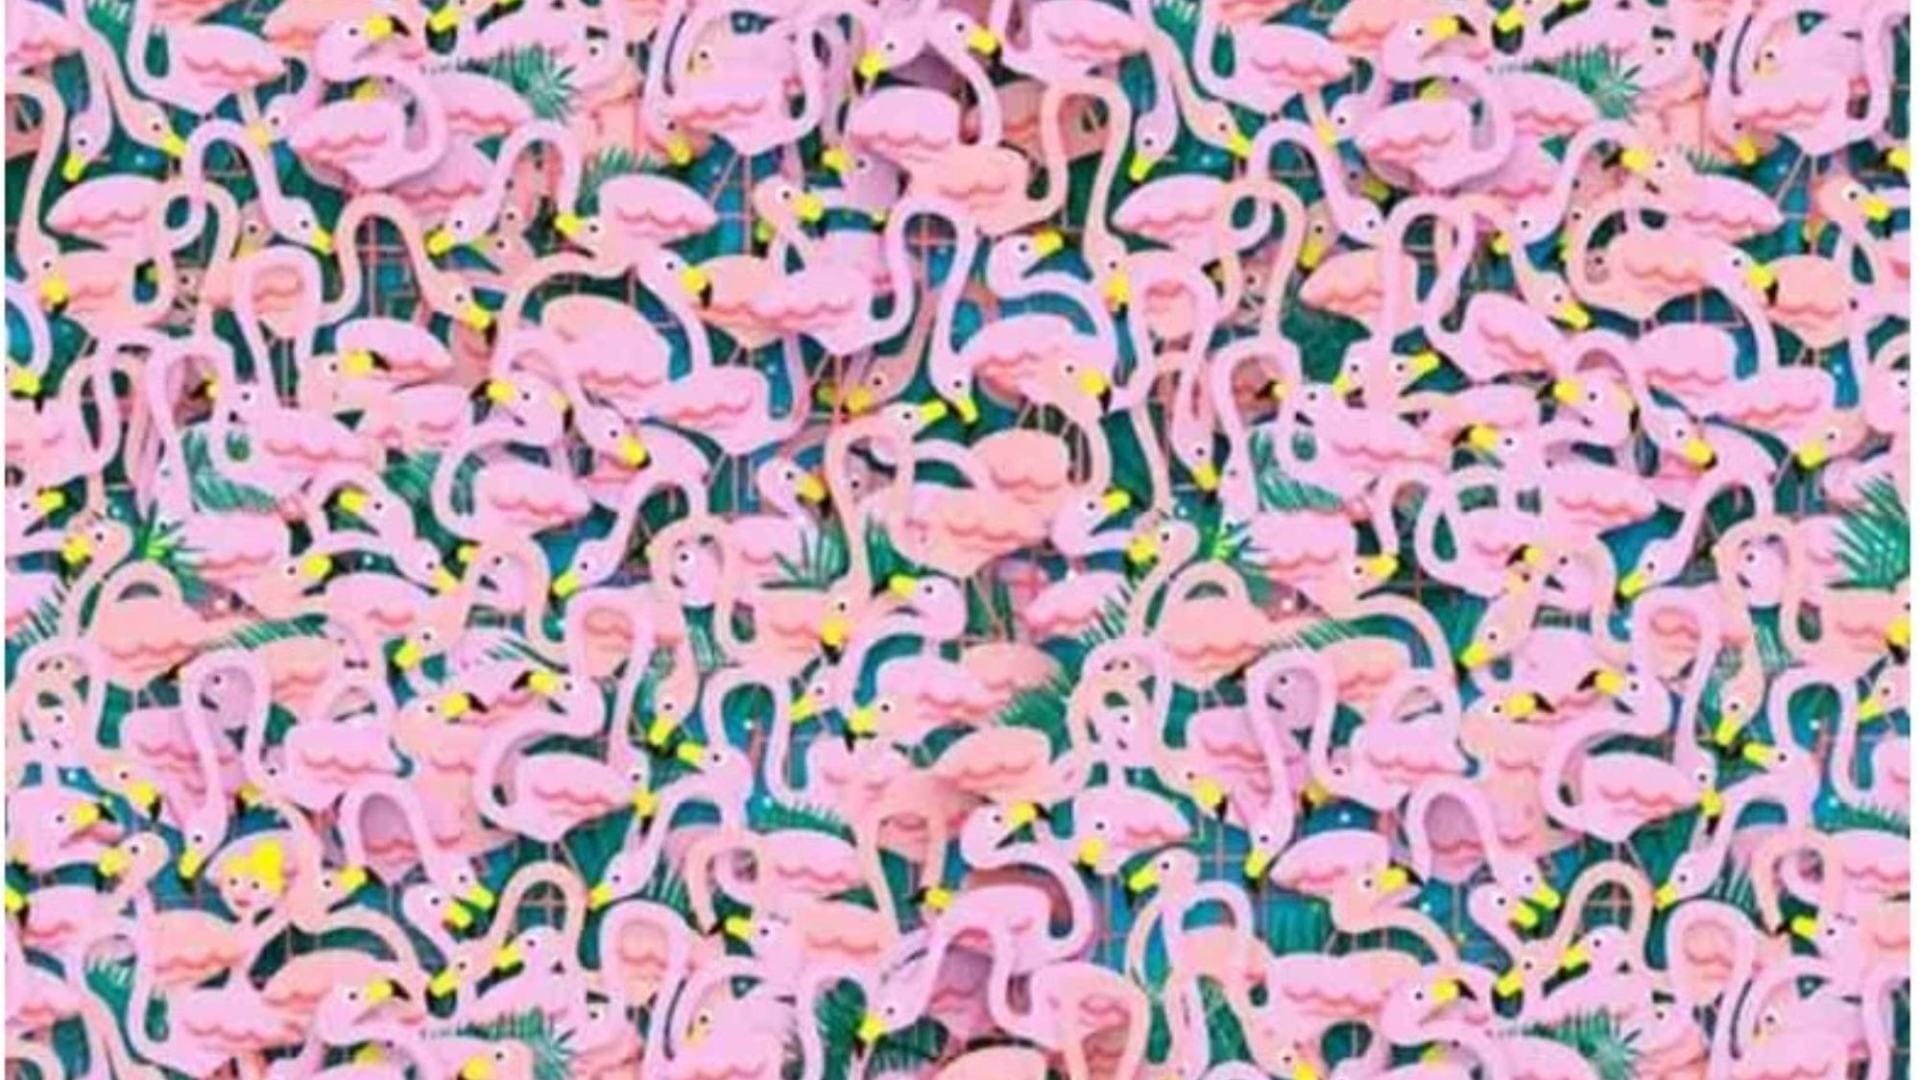 You could be in the top 1% if you spot the ballet dancer hidden among these flamingos in five seconds.